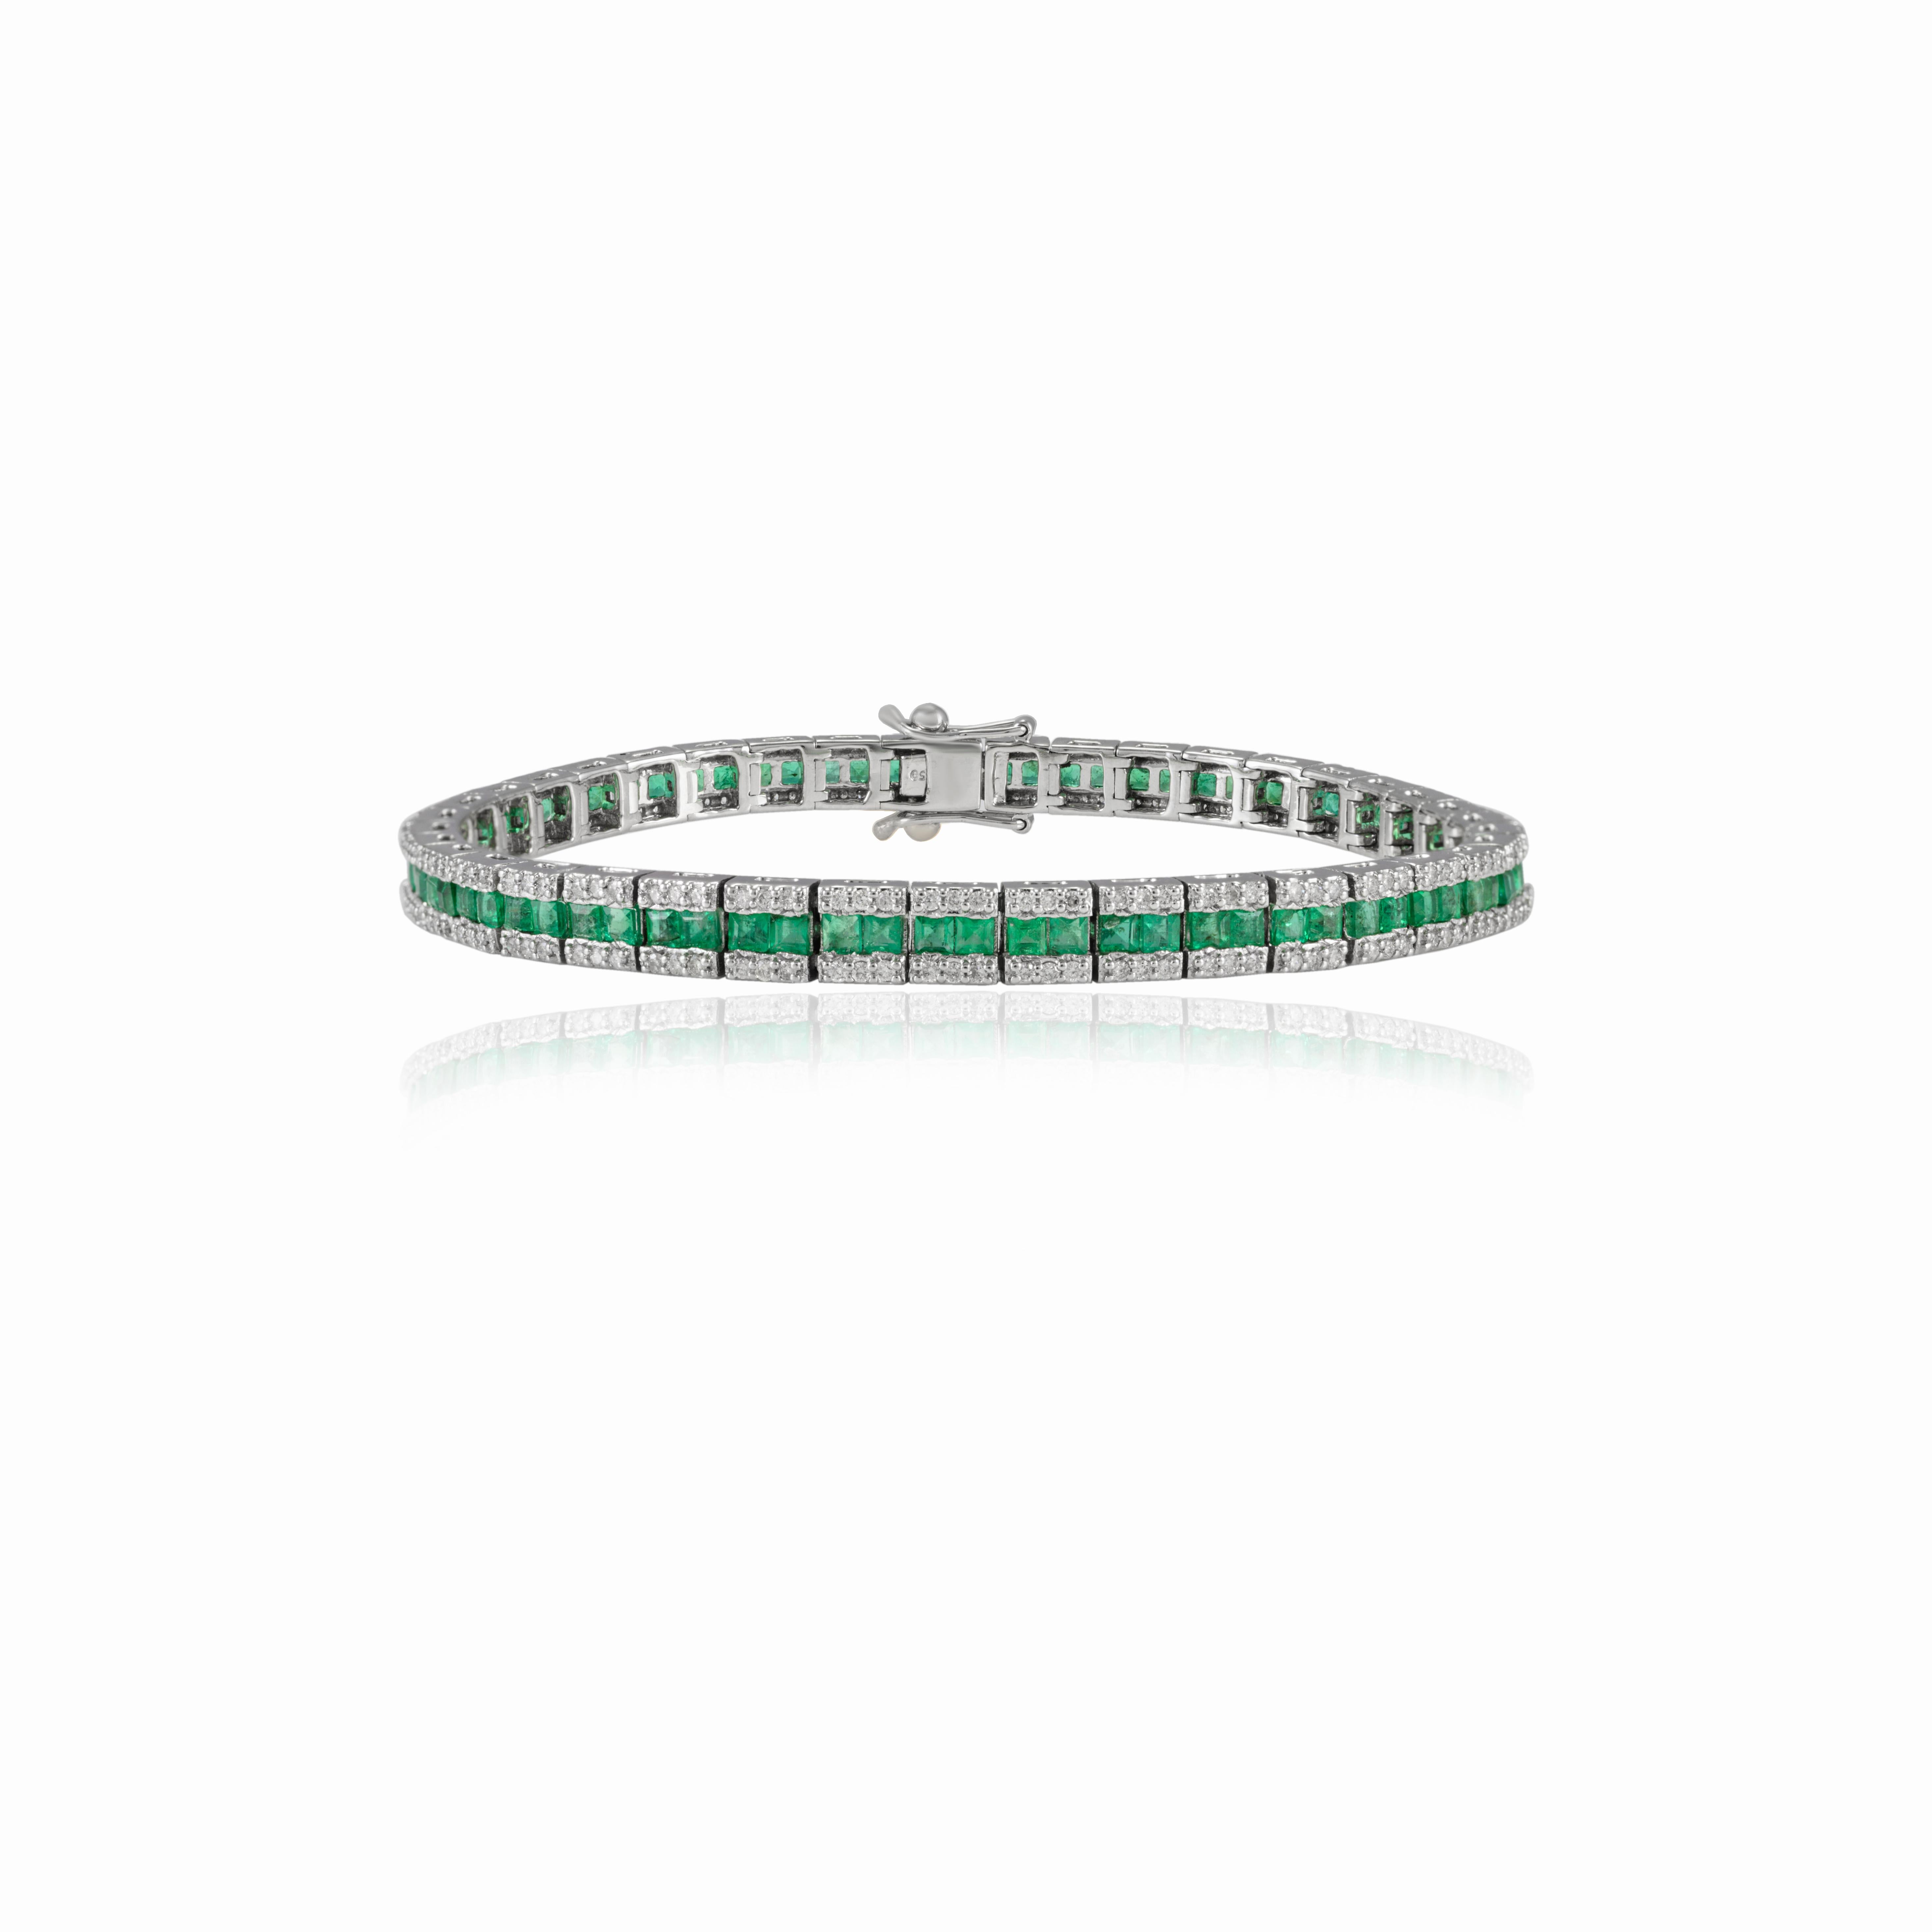 This Certified Emerald Diamond Wedding Tennis Bracelet in 18K gold showcases endlessly sparkling natural emerald, weighing 3.56 carat and diamonds weighing 1.17 carat. It measures 7 inches long in length. 
Emerald enhances intellectual capacity of